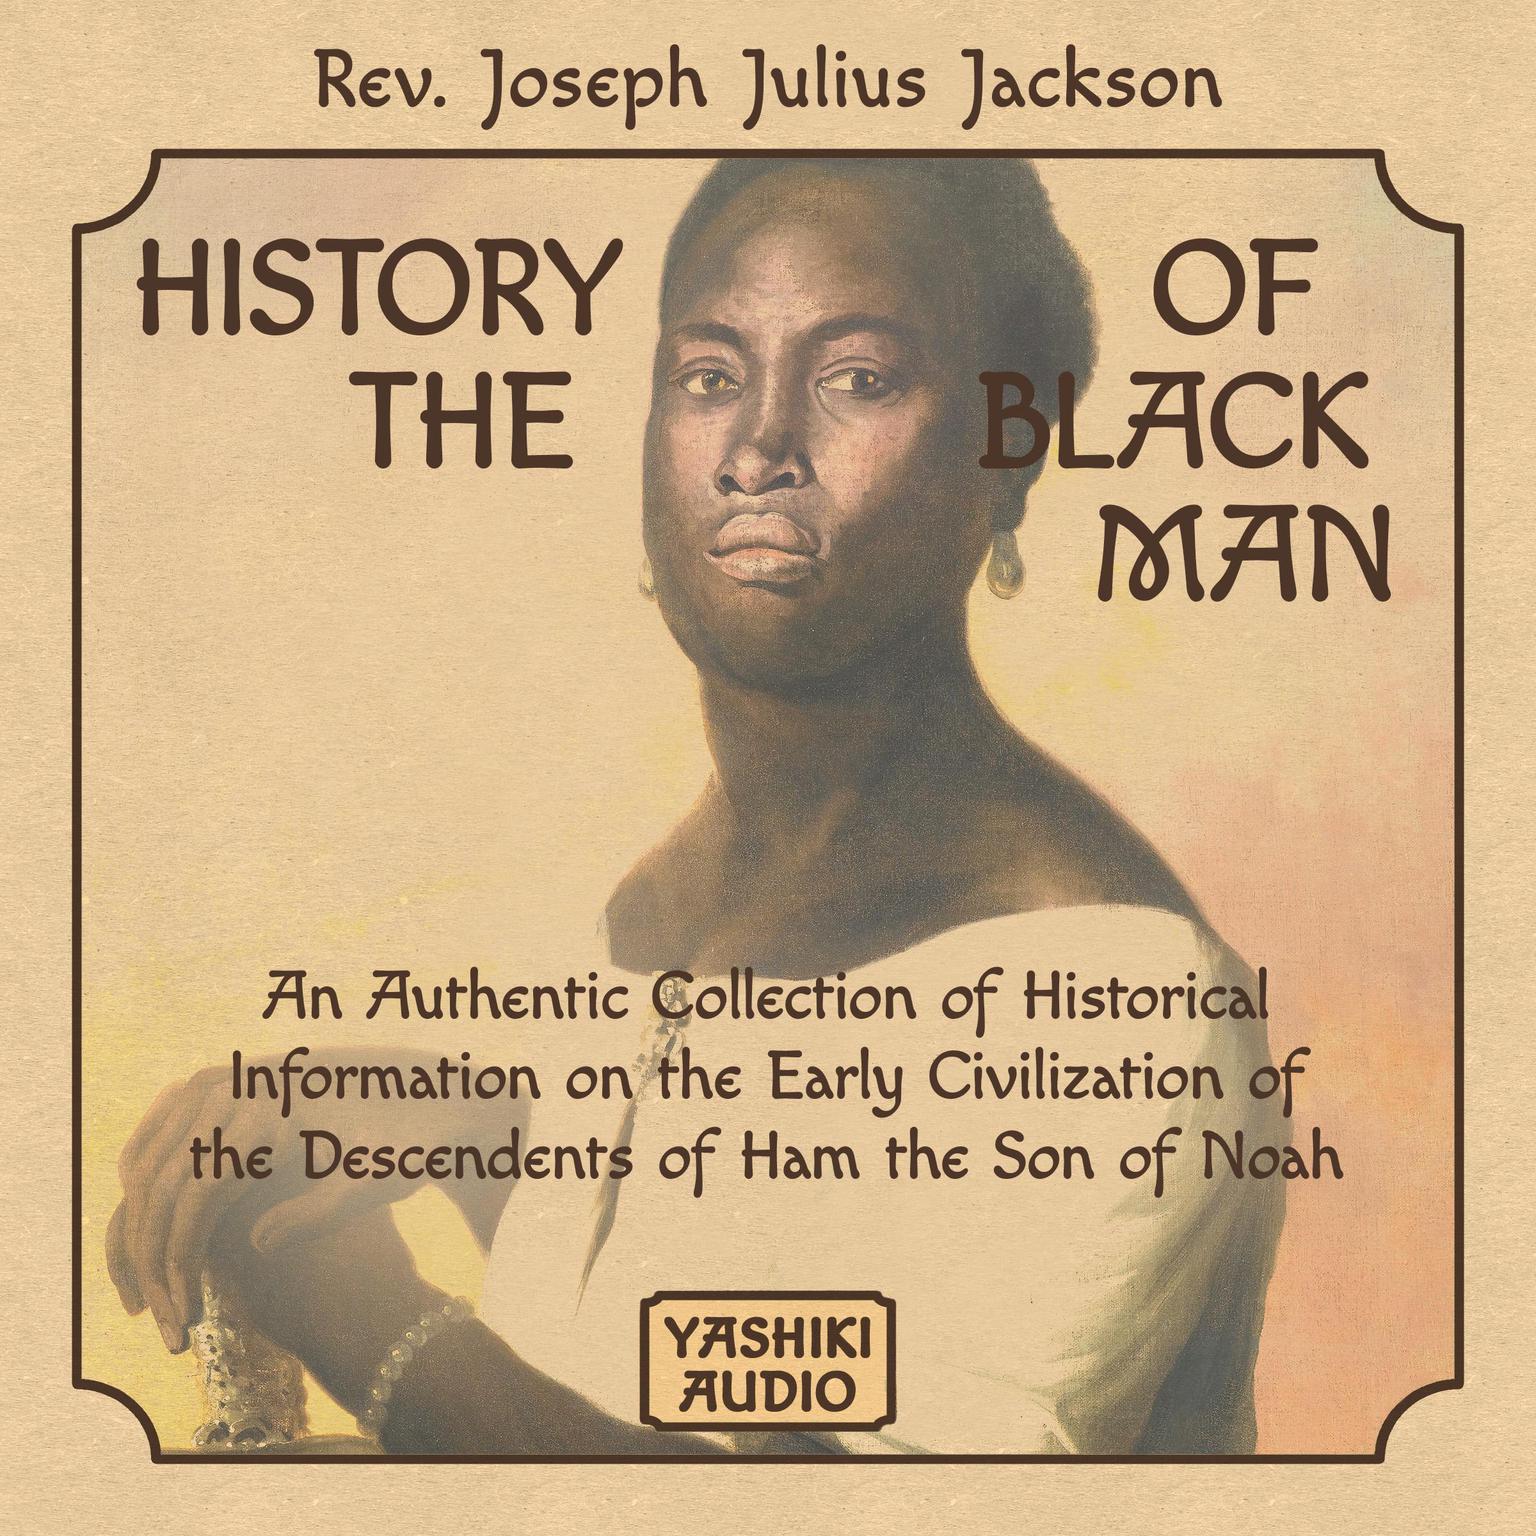 History of the Black Man: An Authentic Collection of Historical Information on the Early Civilization of the Descendents of Ham the Son of Noah Audiobook, by Rev. Joseph Julius Jackson